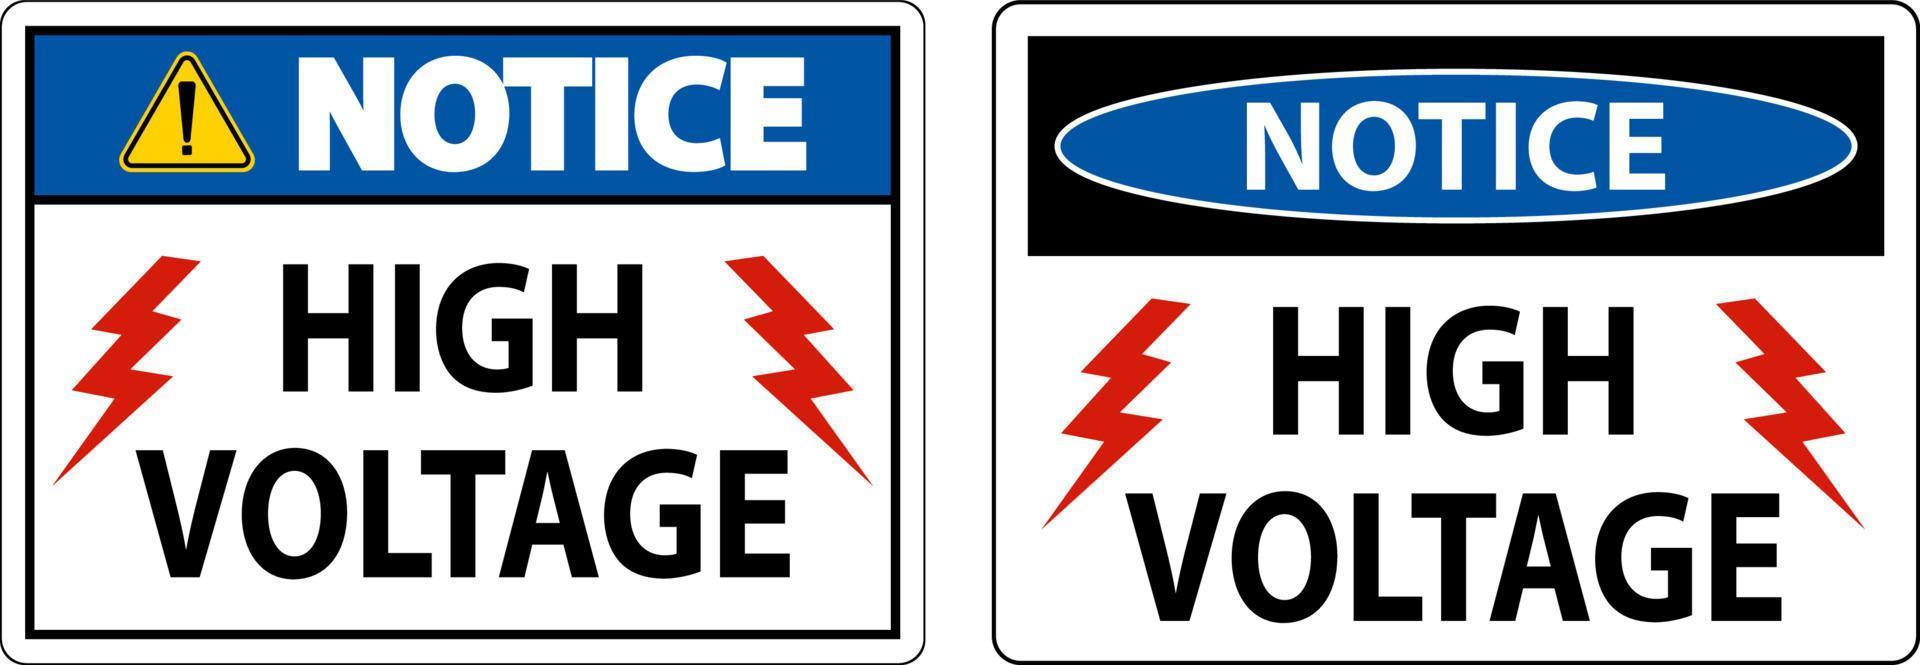 Notice High Voltage Sign On White Background vector